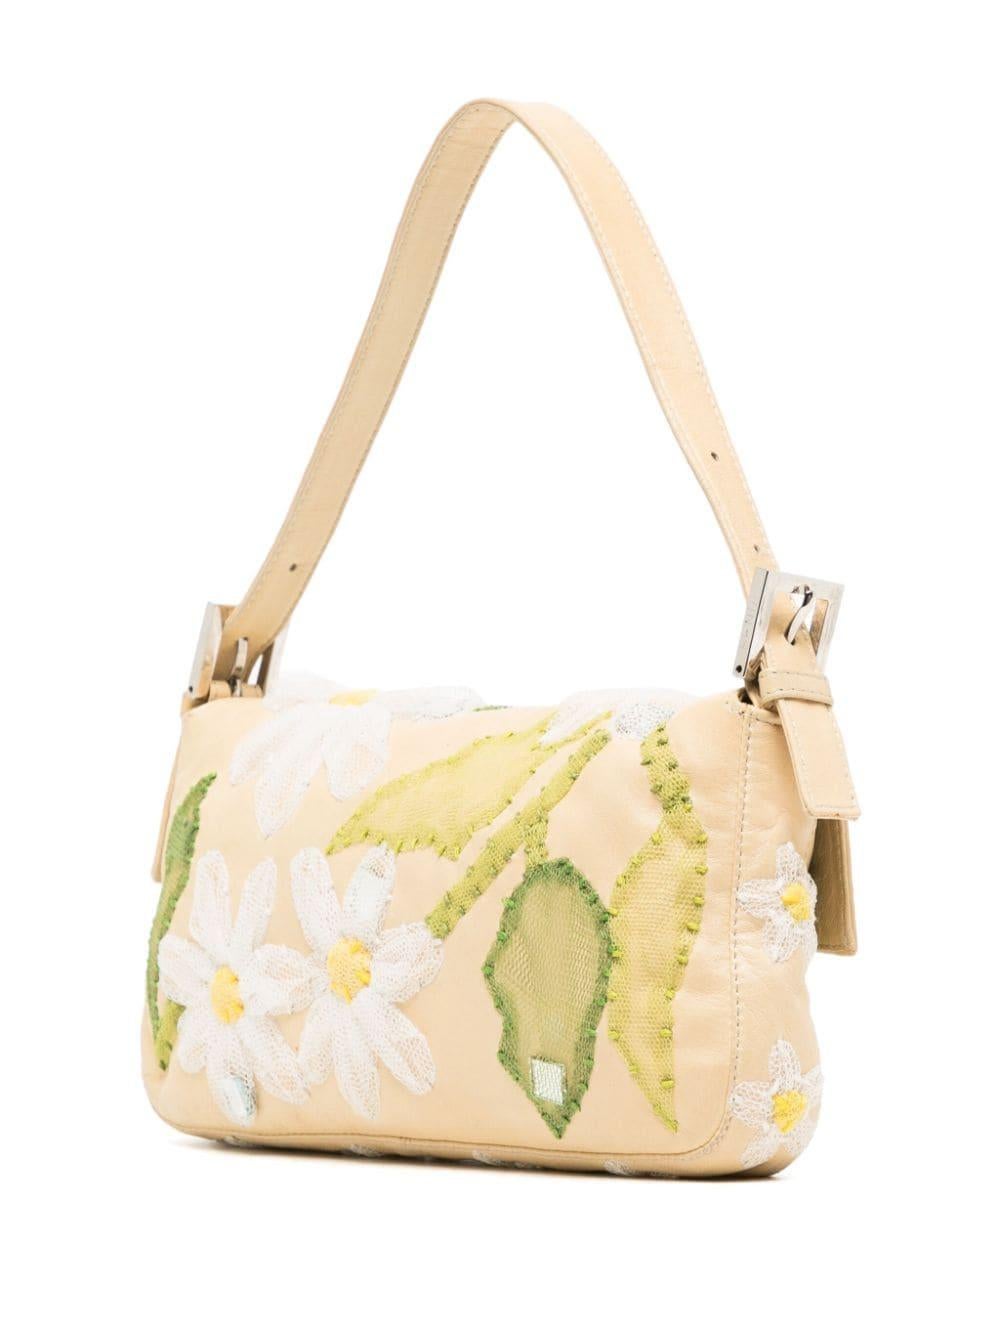 Enhance your vintage style this season with the iconic Fendi Floral Embroidered Baguette. Inspired by the French women carrying baguette bread under their arms, this trendy baguette from Fendi is the perfect piece for spring.

* Yellow leather
* FF